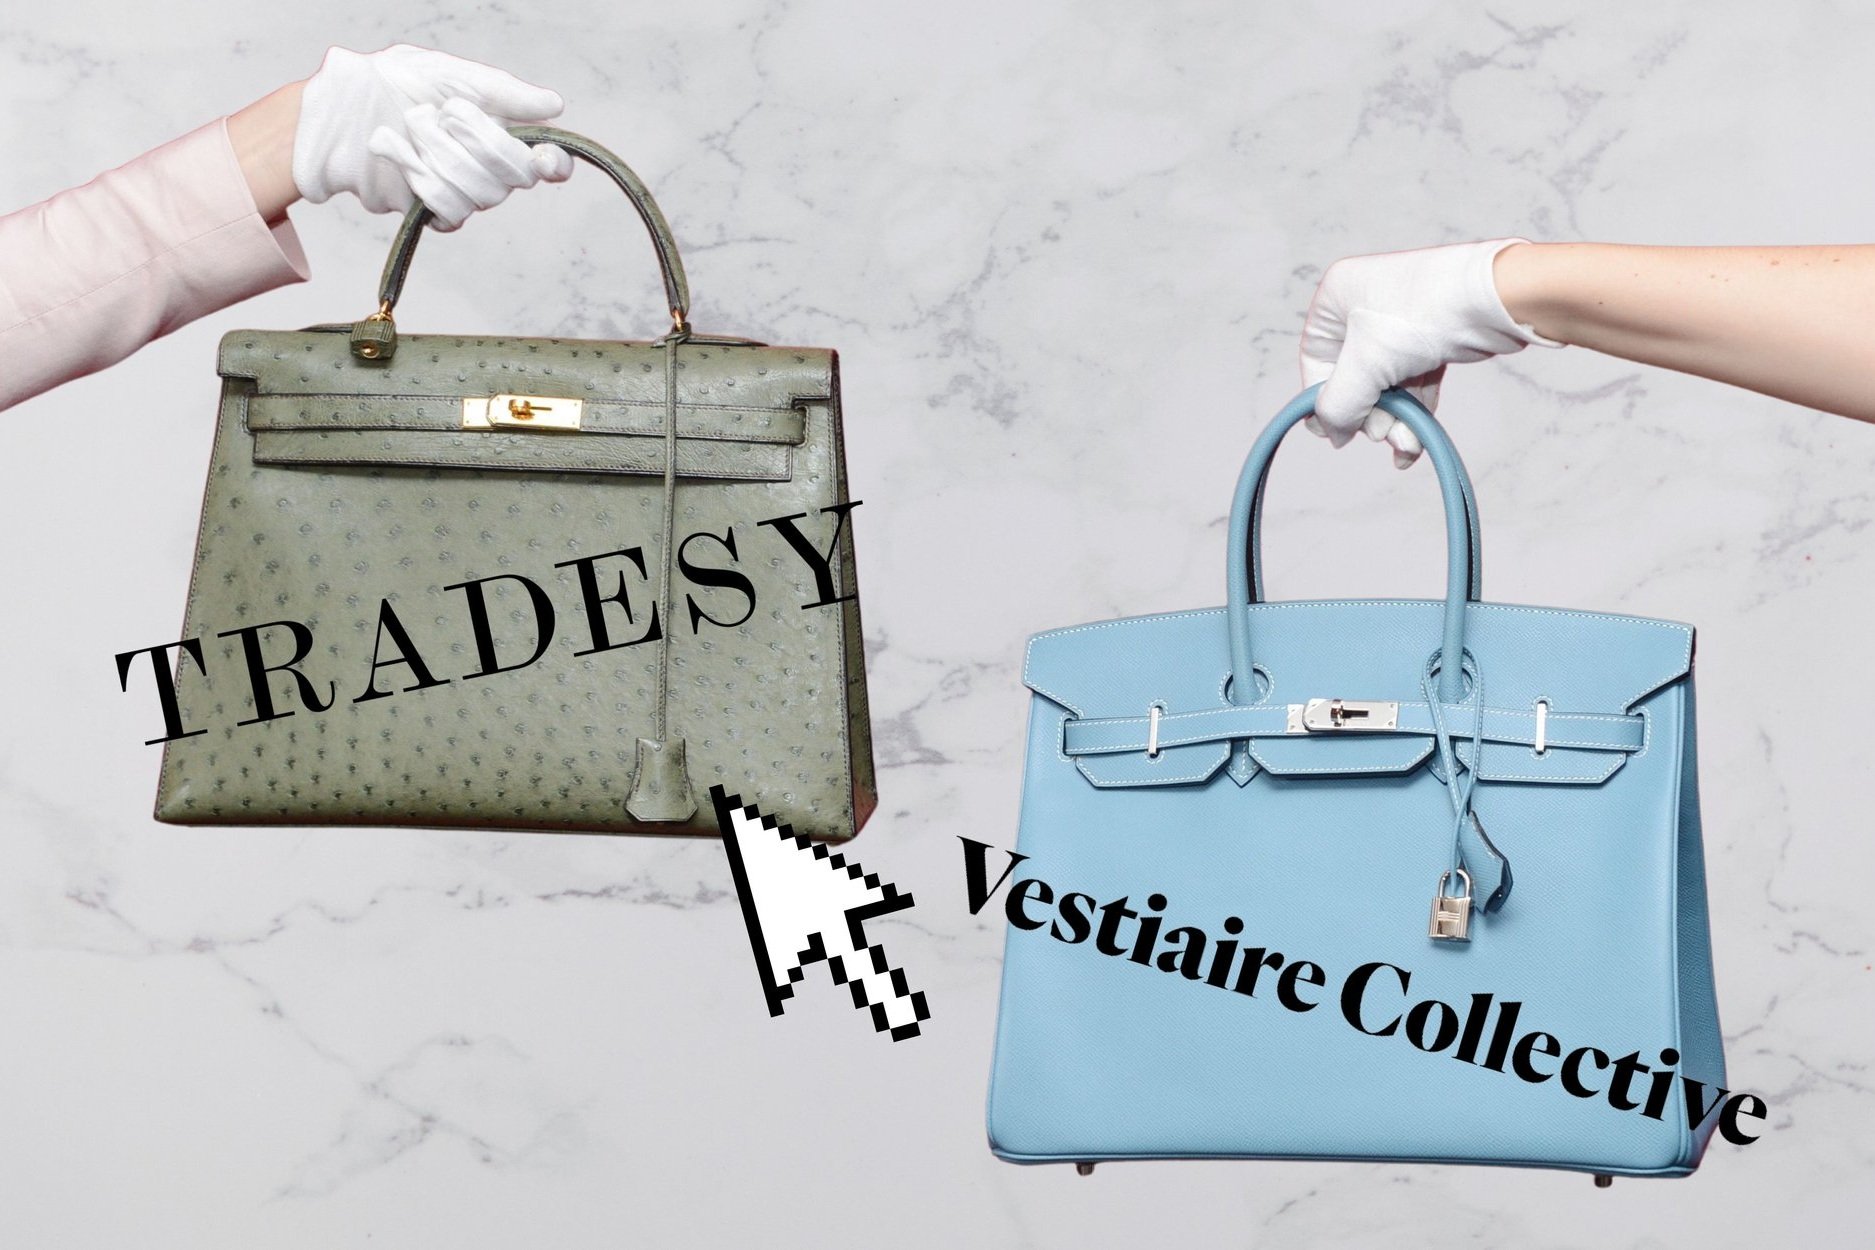 HOW TO FIND A DEAL ON VESTIAIRE COLLECTIVE